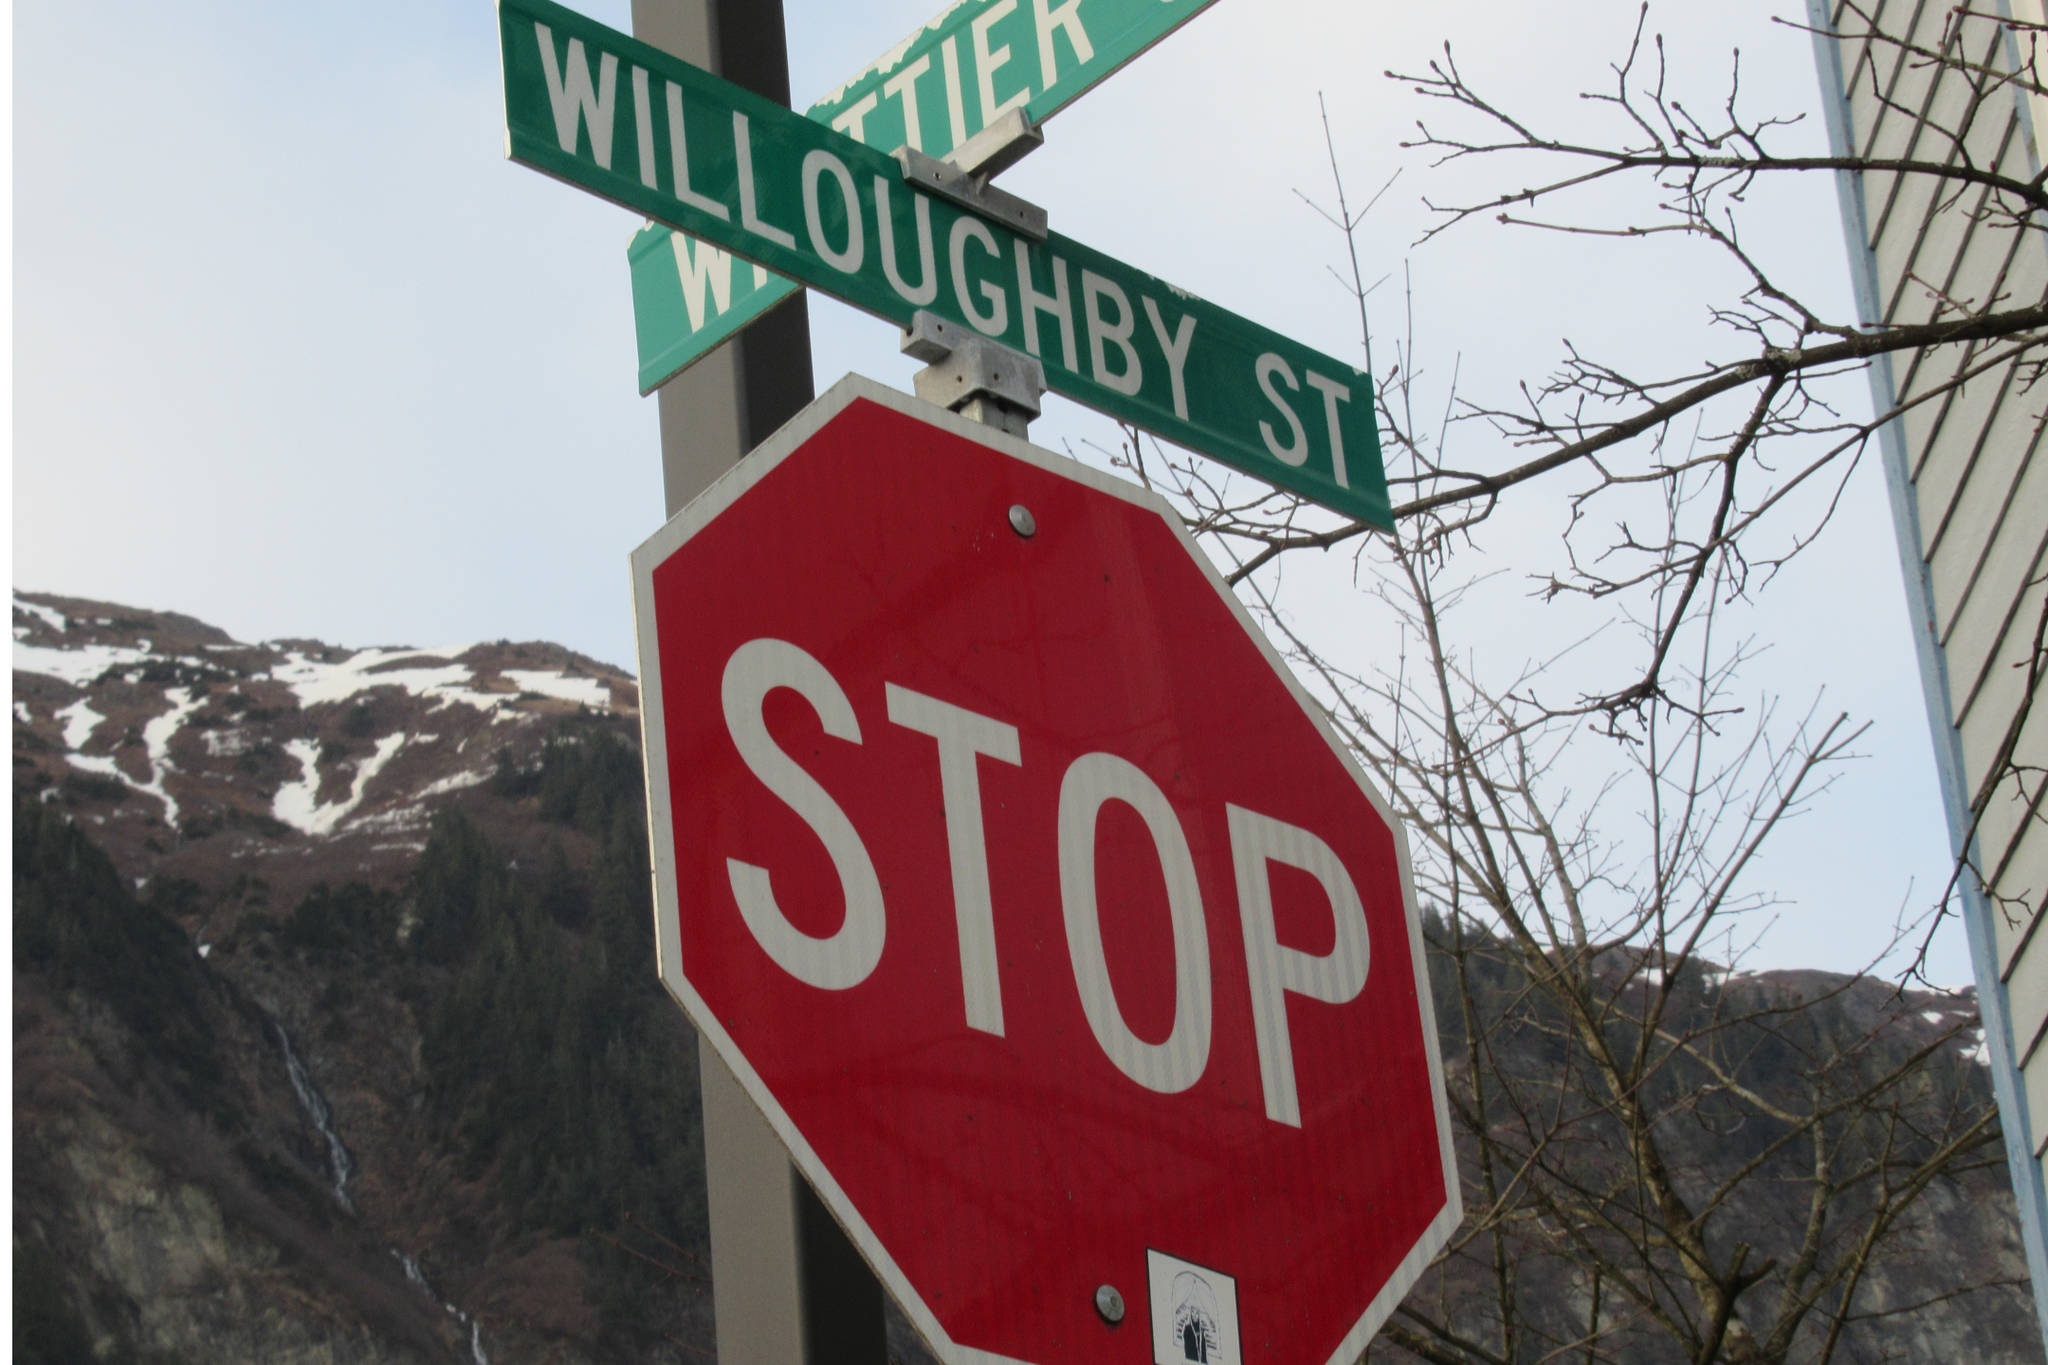 The Willoughby District, which is named for the downtown Juneau Street, could have a new name soon. (Ben Hohenstatt | Juneau Empire)